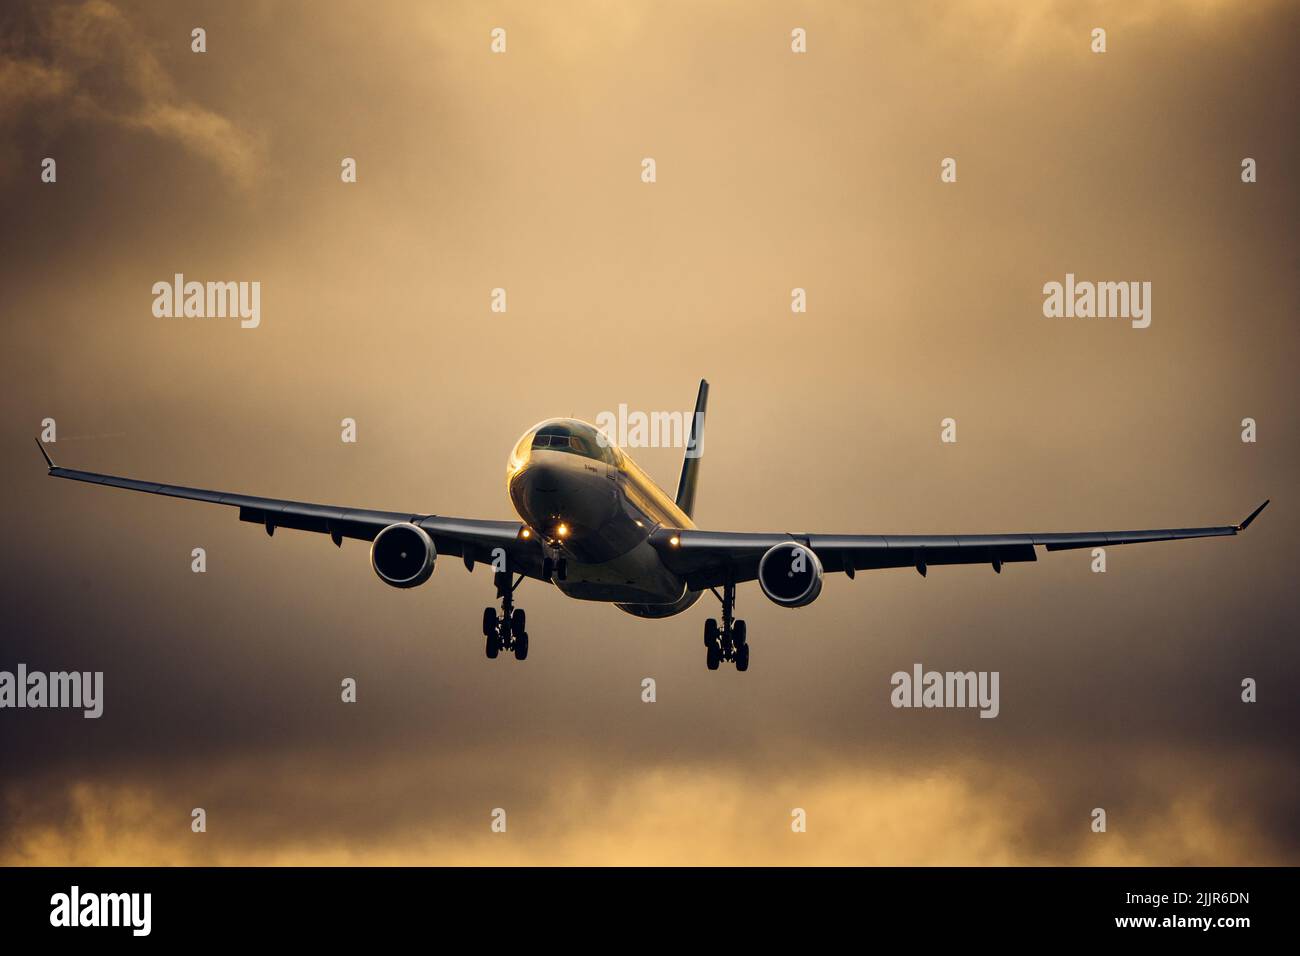 A shot of an Aer Lingus Airbus airliner with a dark cloudy background Stock Photo